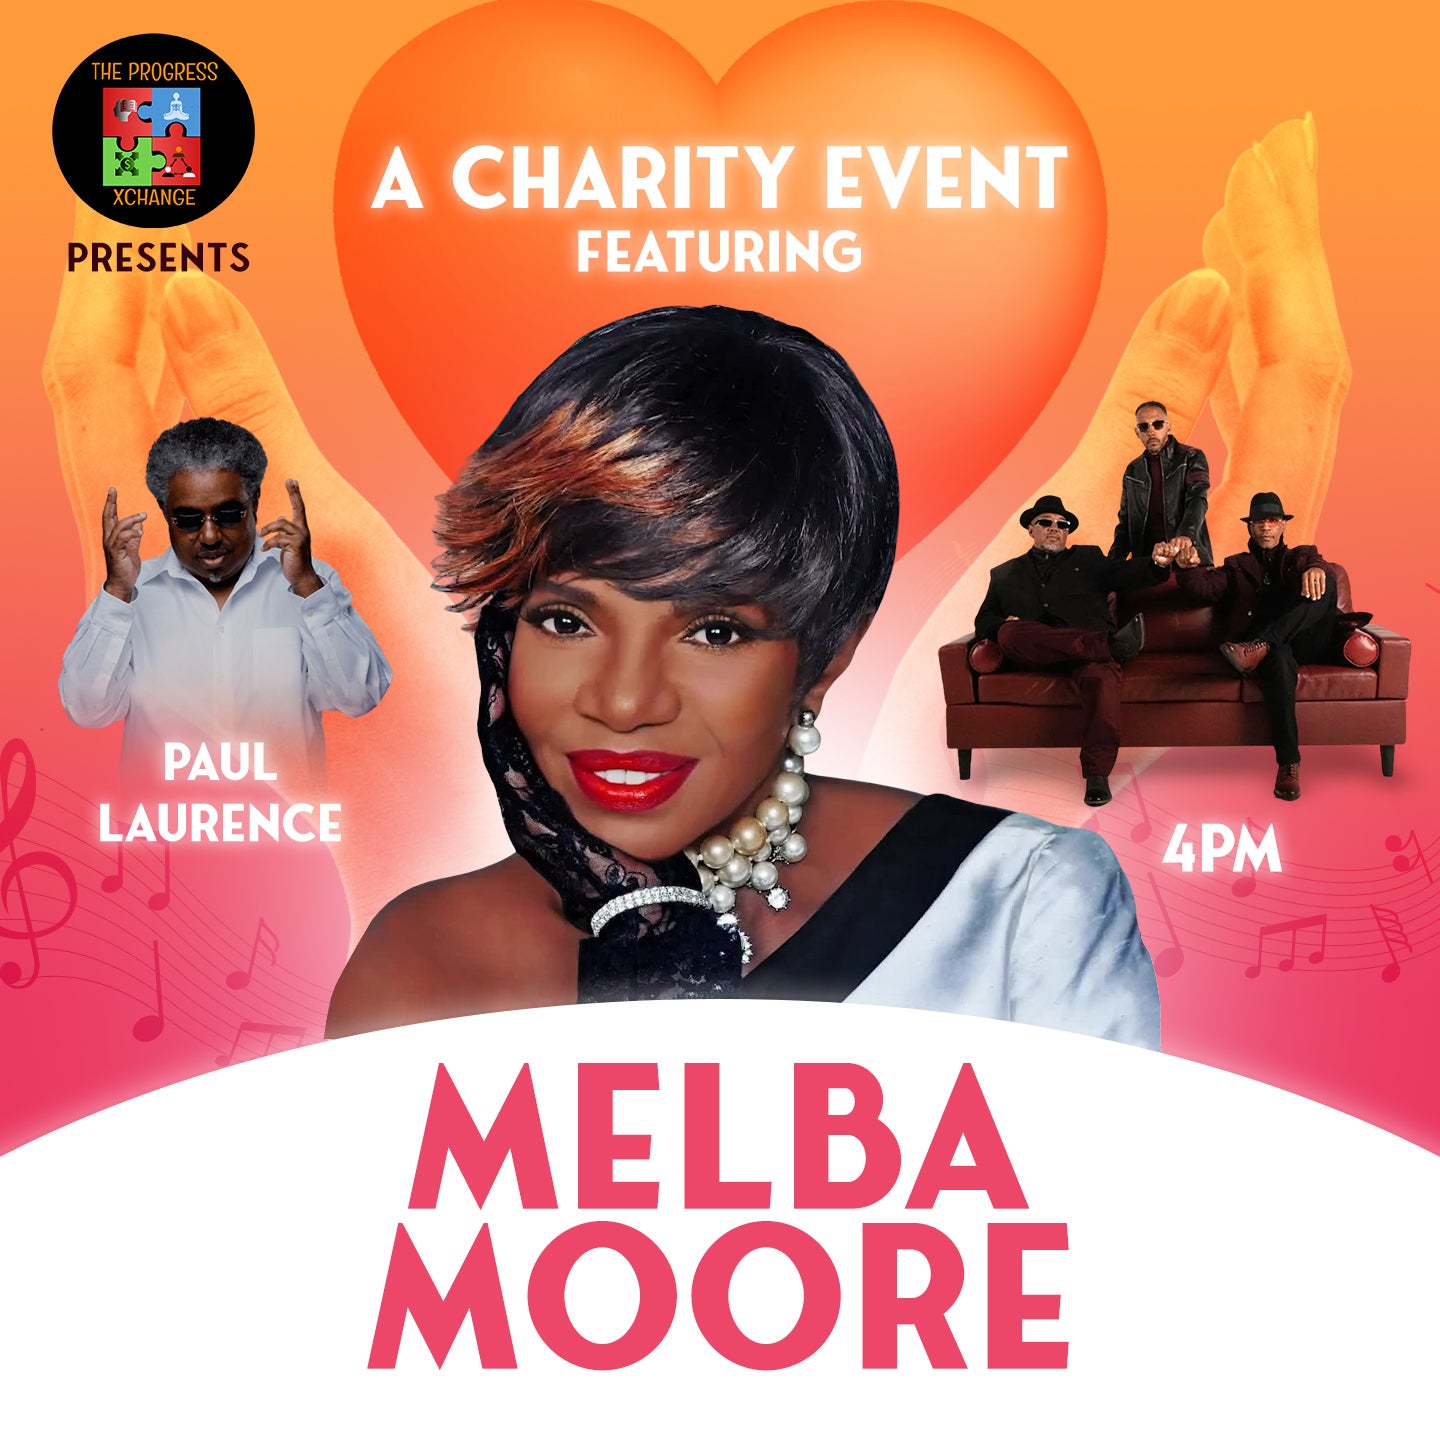 A Charity Event featuring Melba Moore with Paul Laurence & 4PM